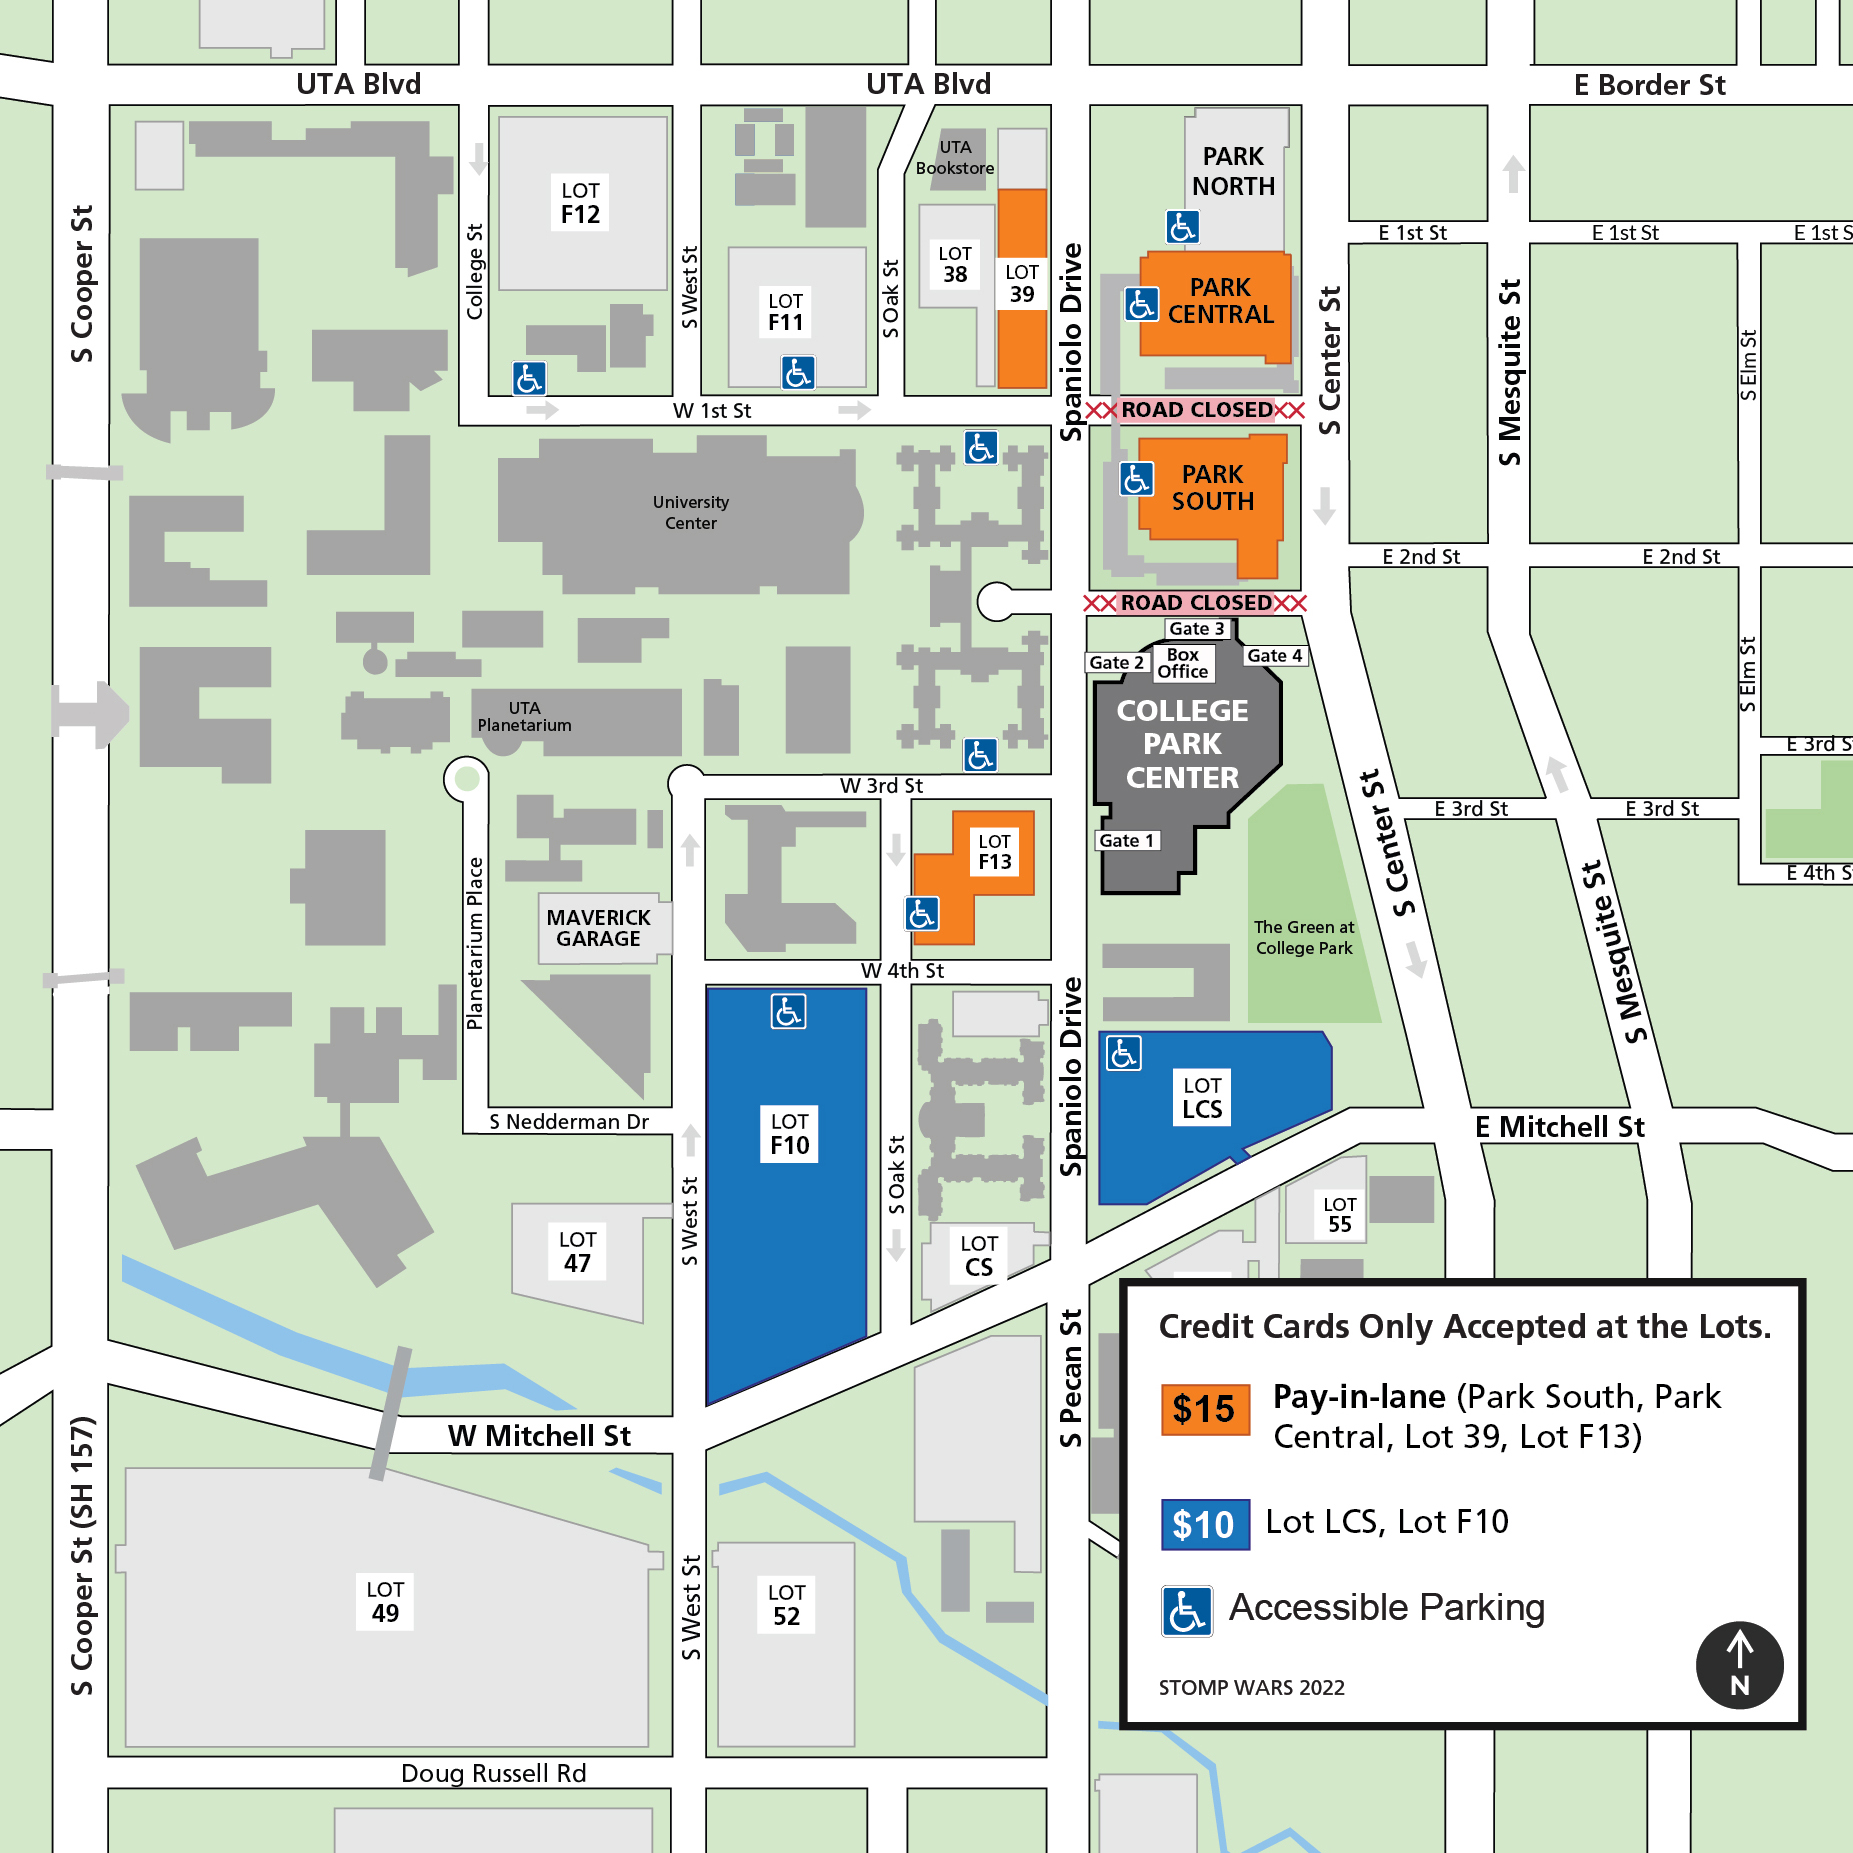 Stomp Wars Parking Map, Directions, and Prohibited Items – College Park ...